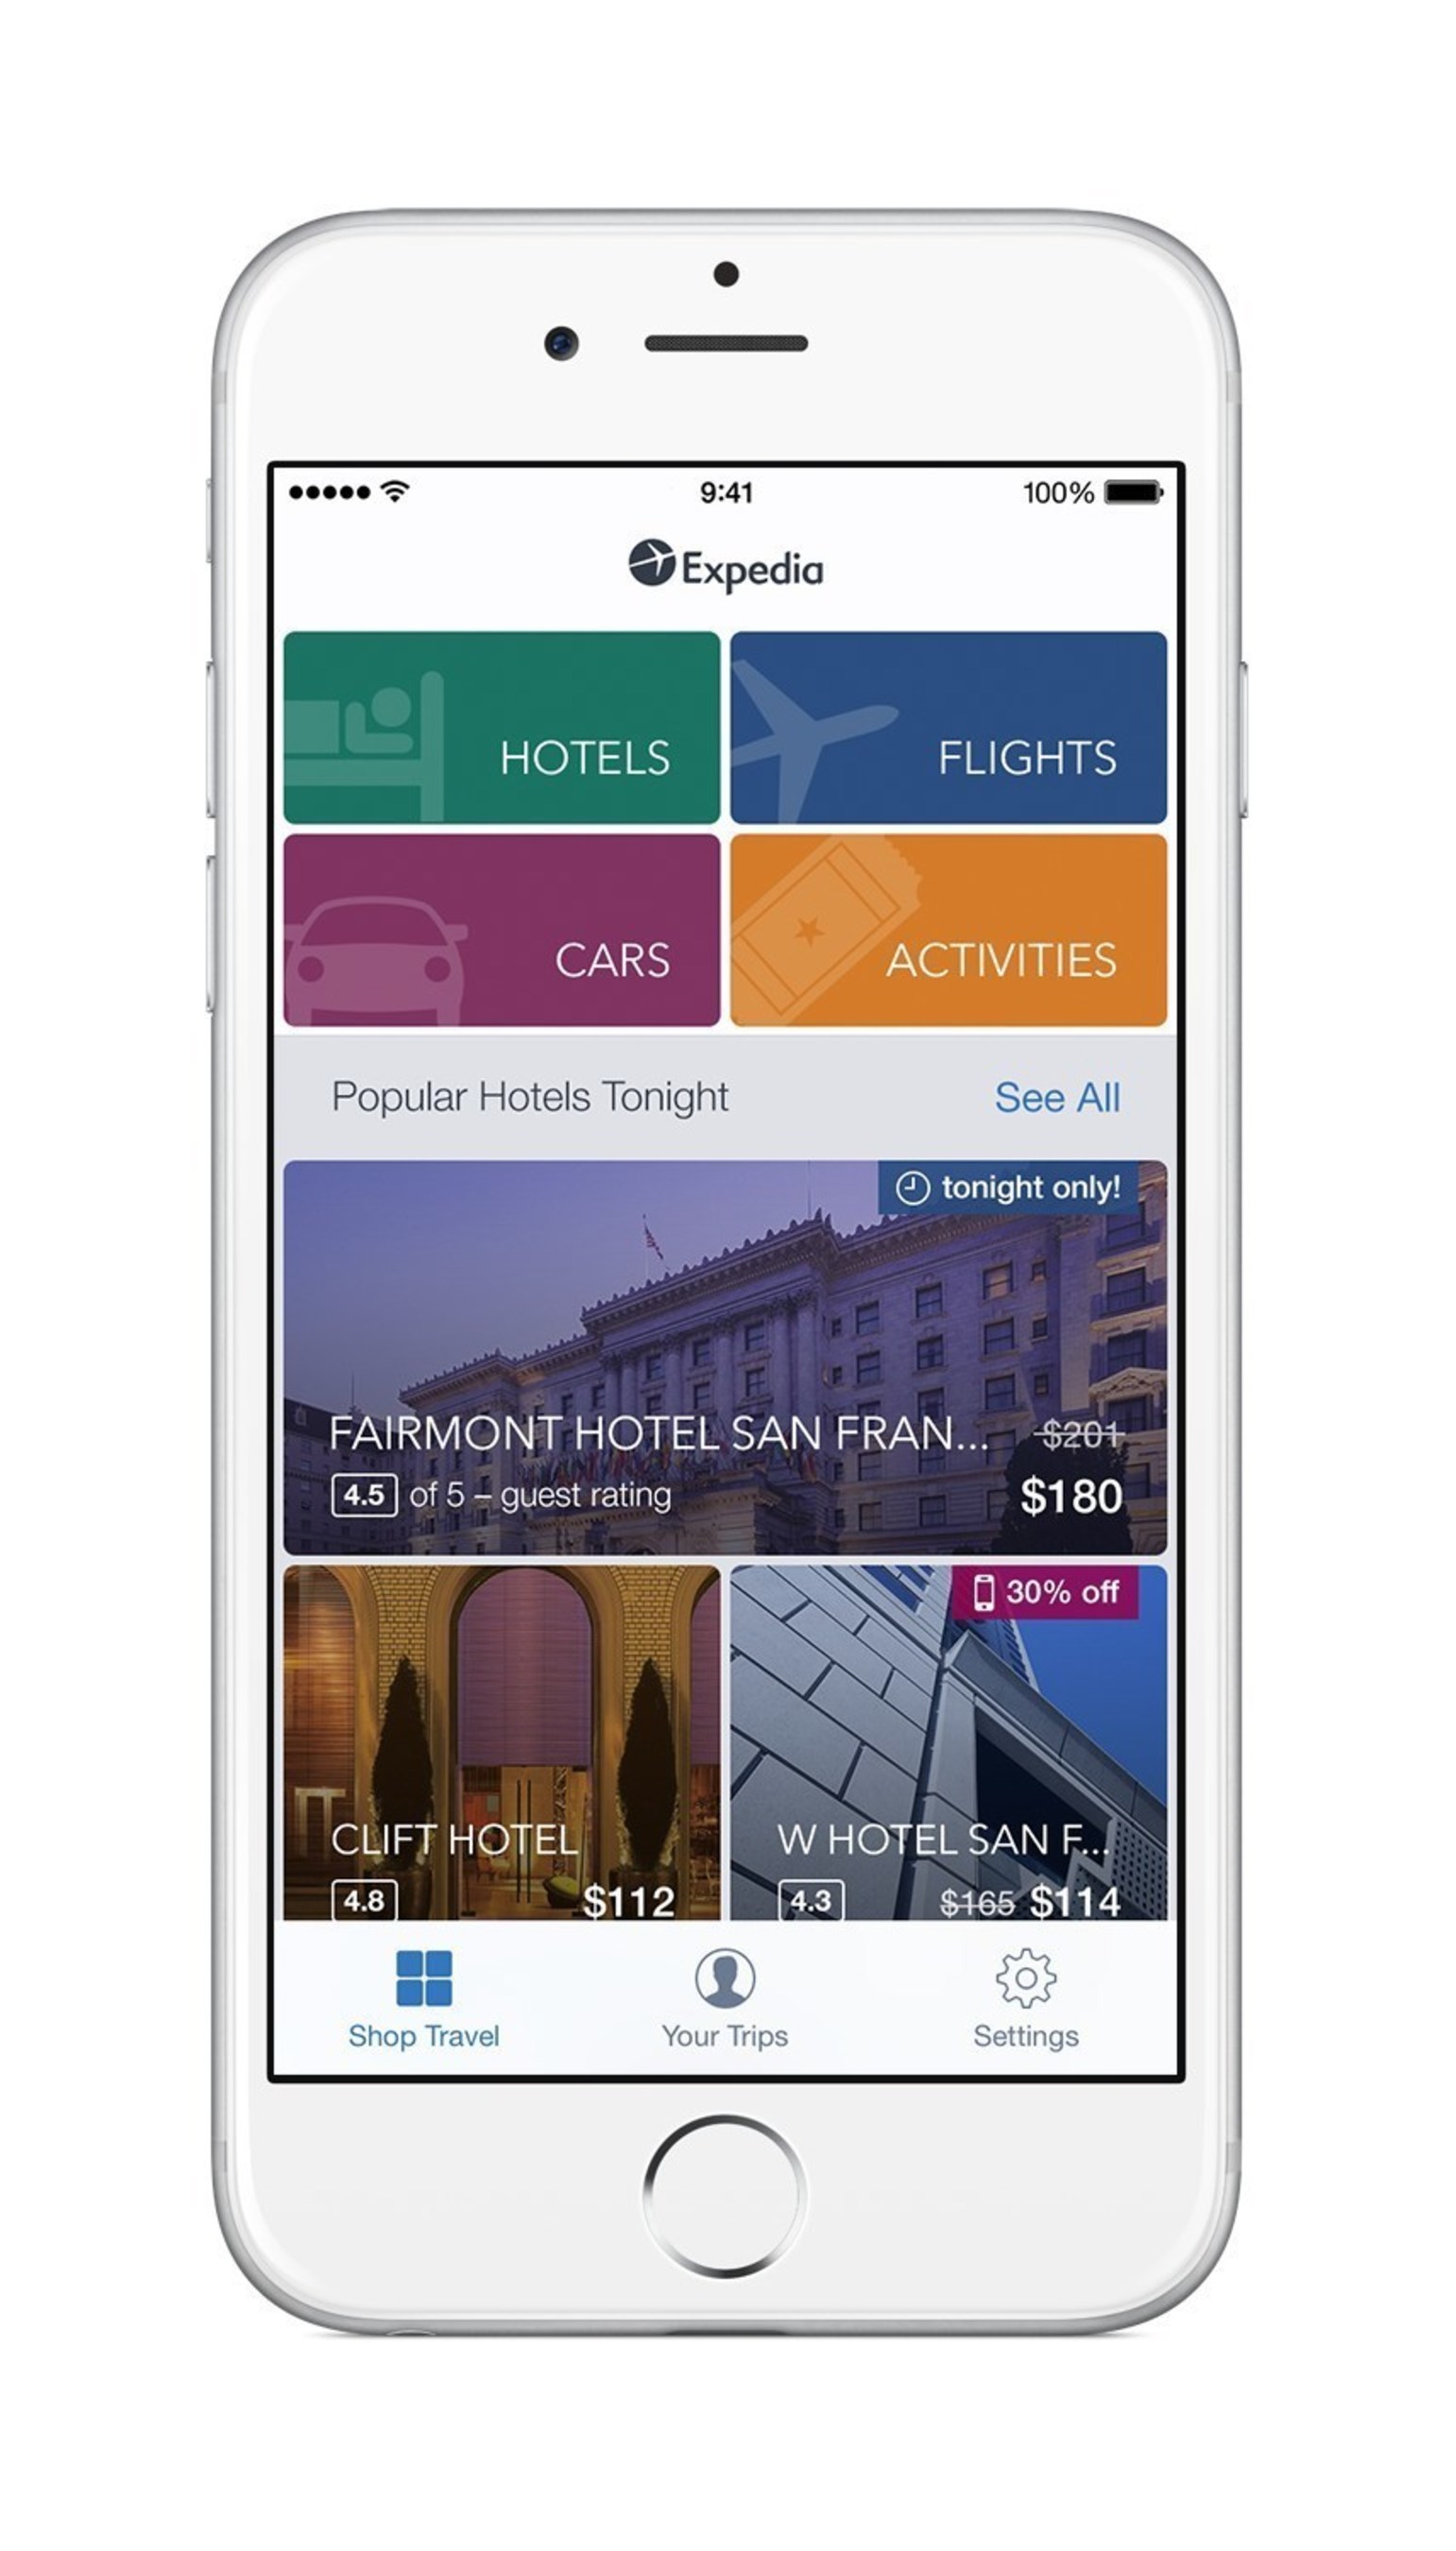 Expedia Accelerates Mobile Growth, Introduces Major App Updates to Address Traveler Requests